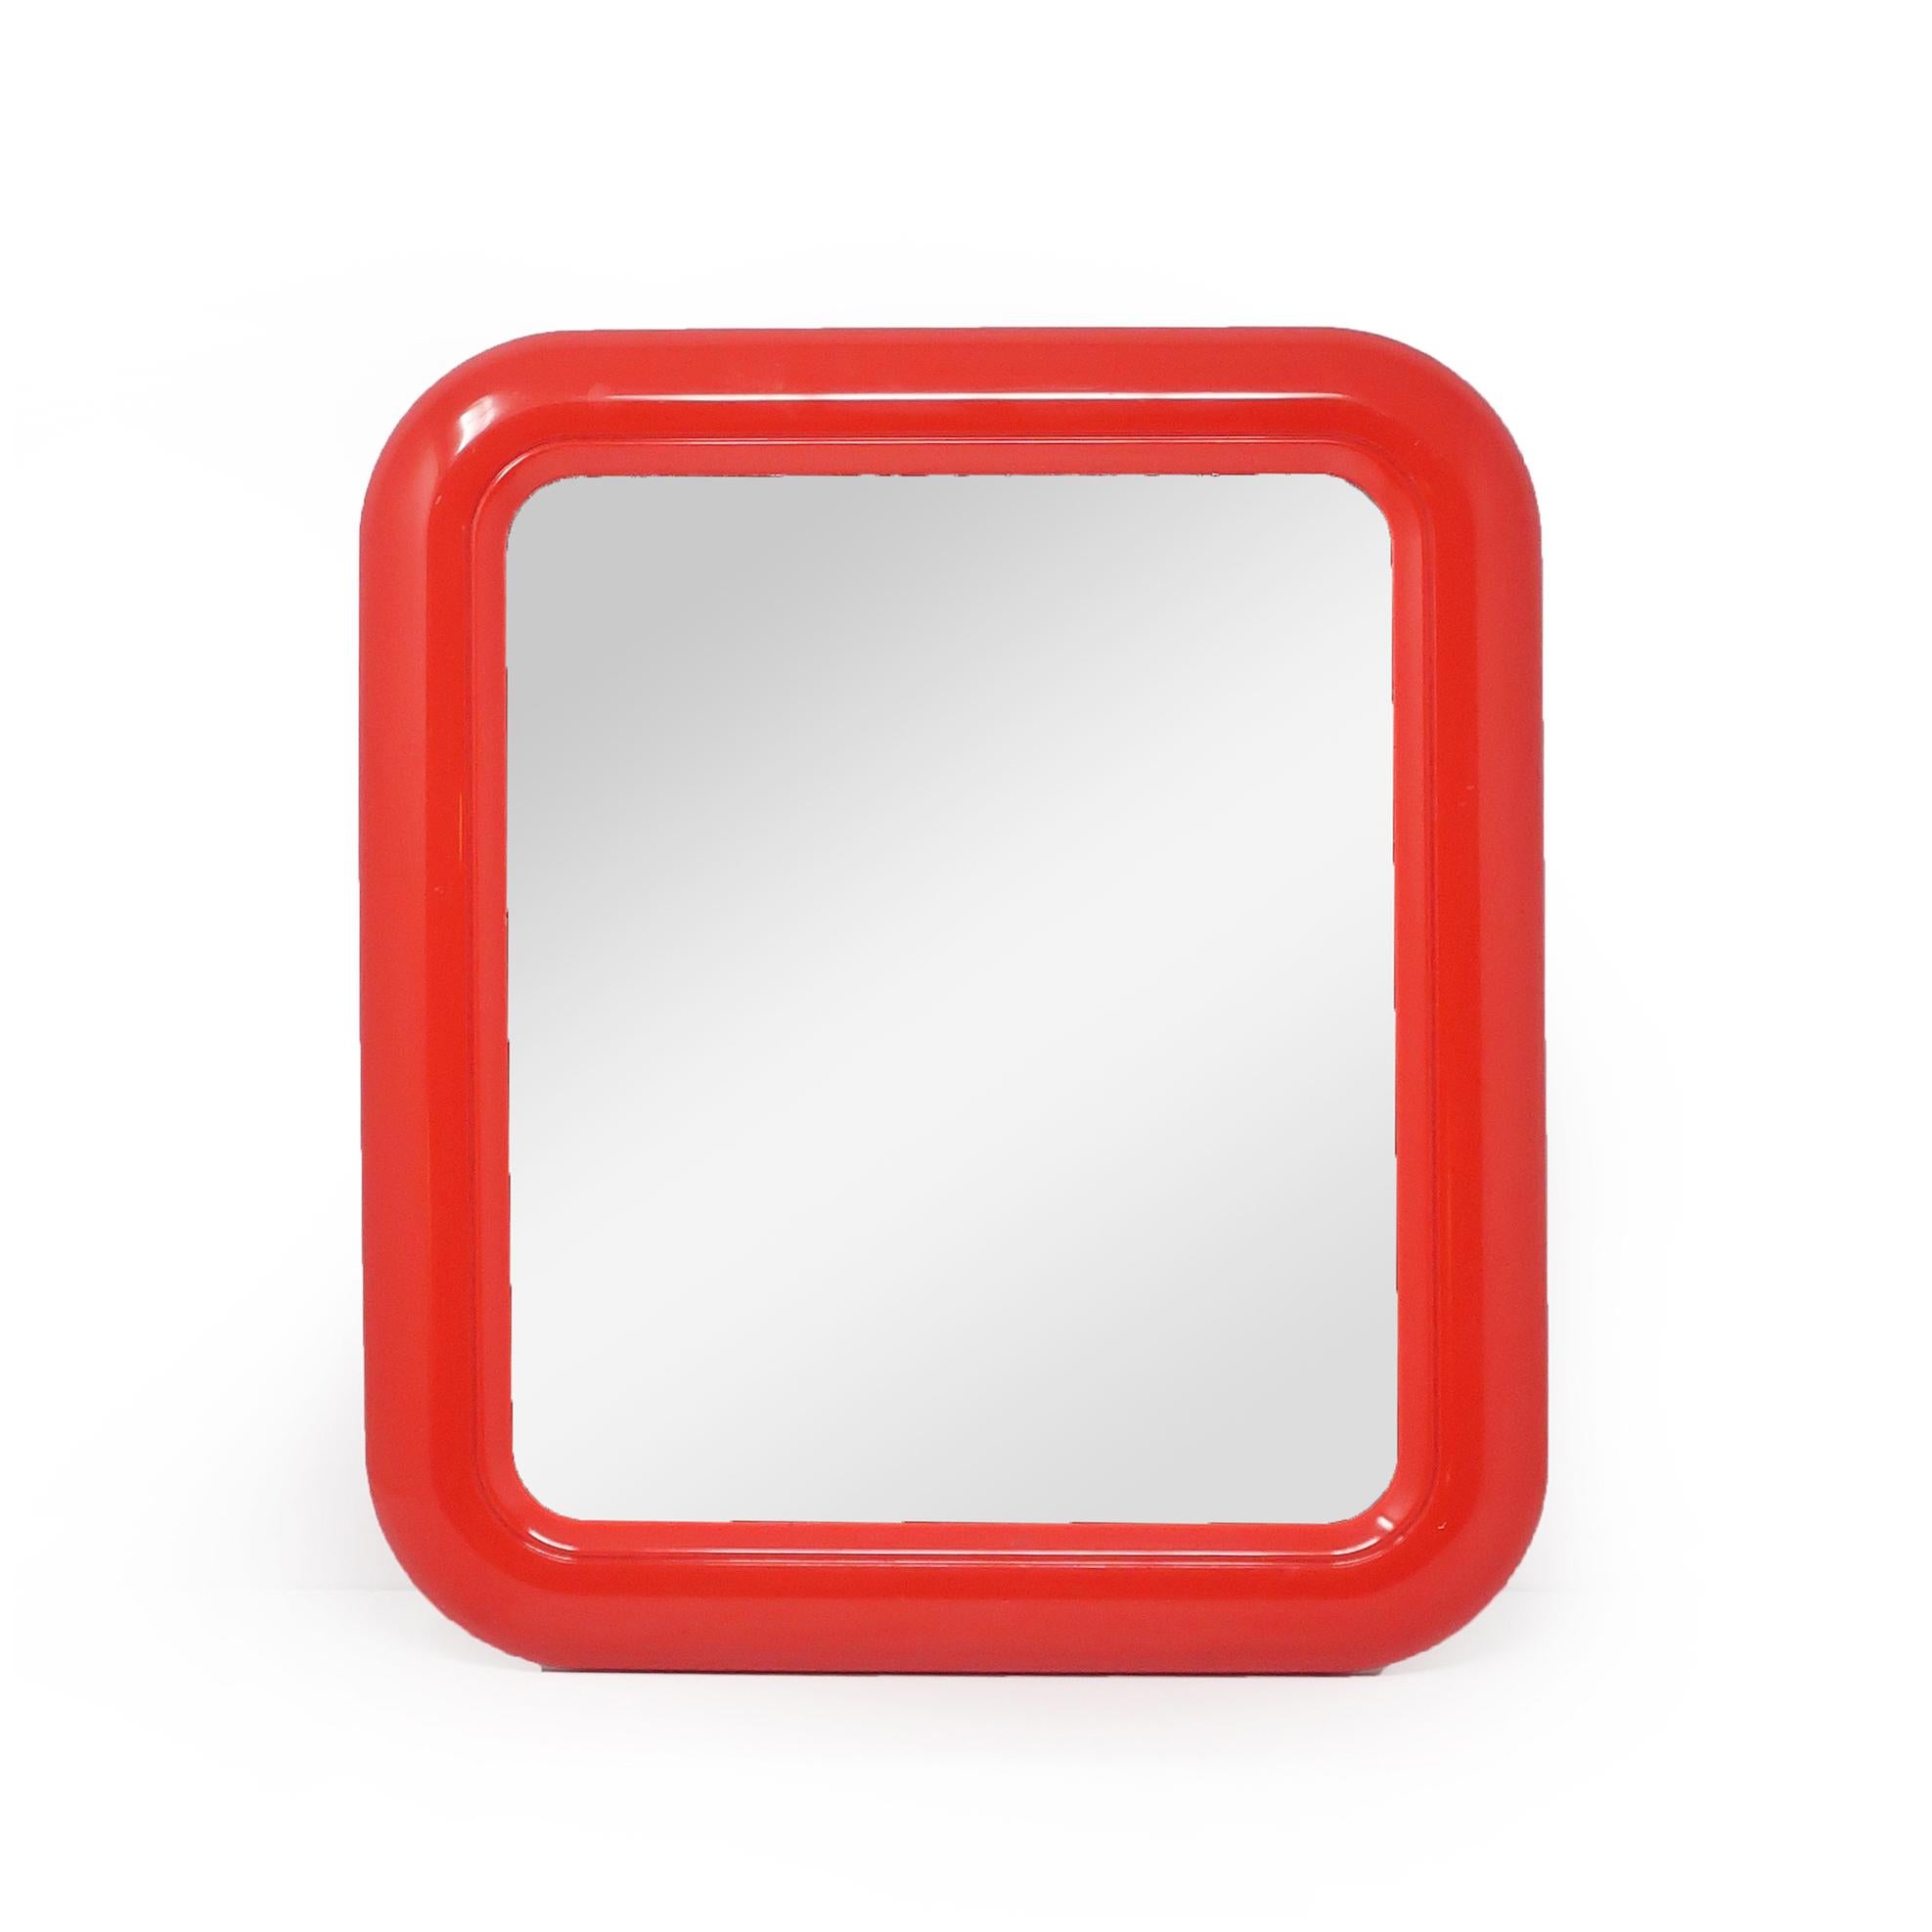 A very cool 1980s modern rectangular mirror in a red plastic frame with rounded corners.  Looks great and adds a pop of color in an entryway, hallway or bedroom, or for decorating a living room.

In very good vintage condition with no silver loss,